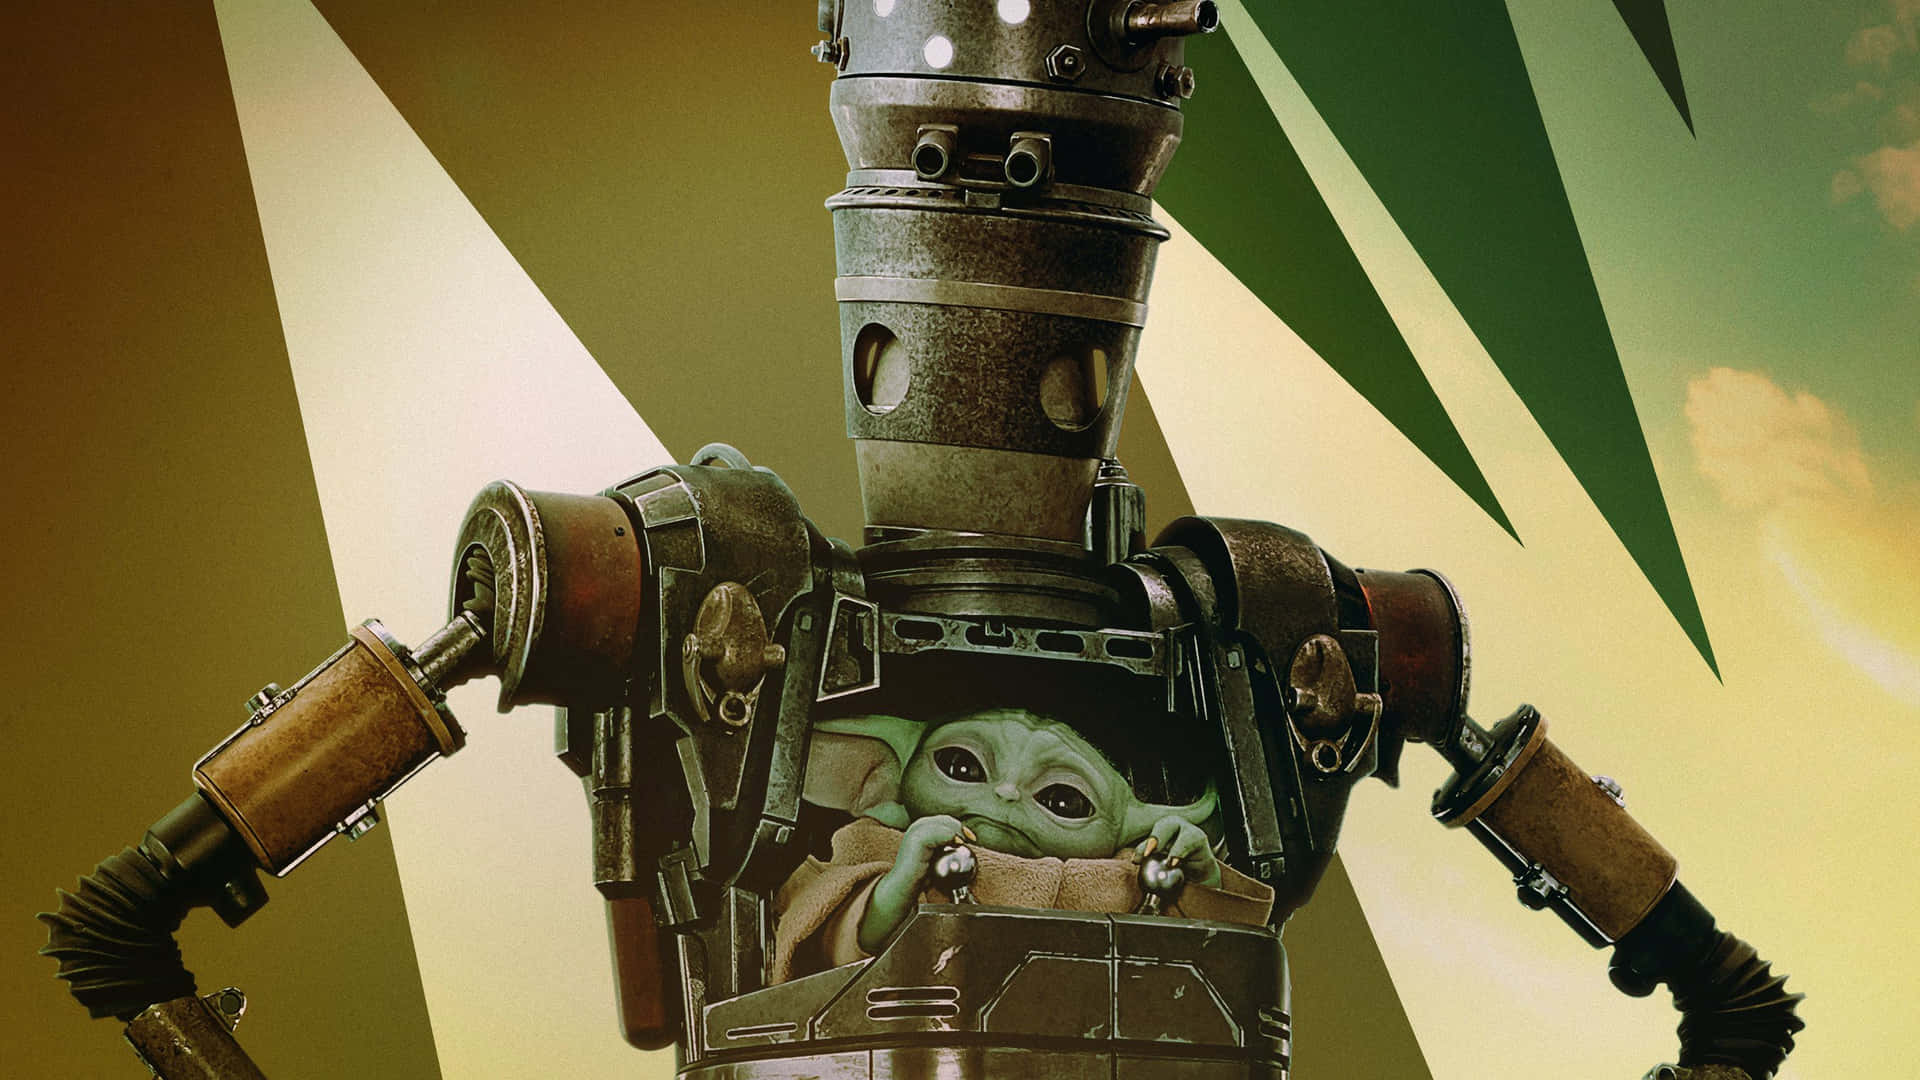 Groguin Podwith Droid Arms Wallpaper